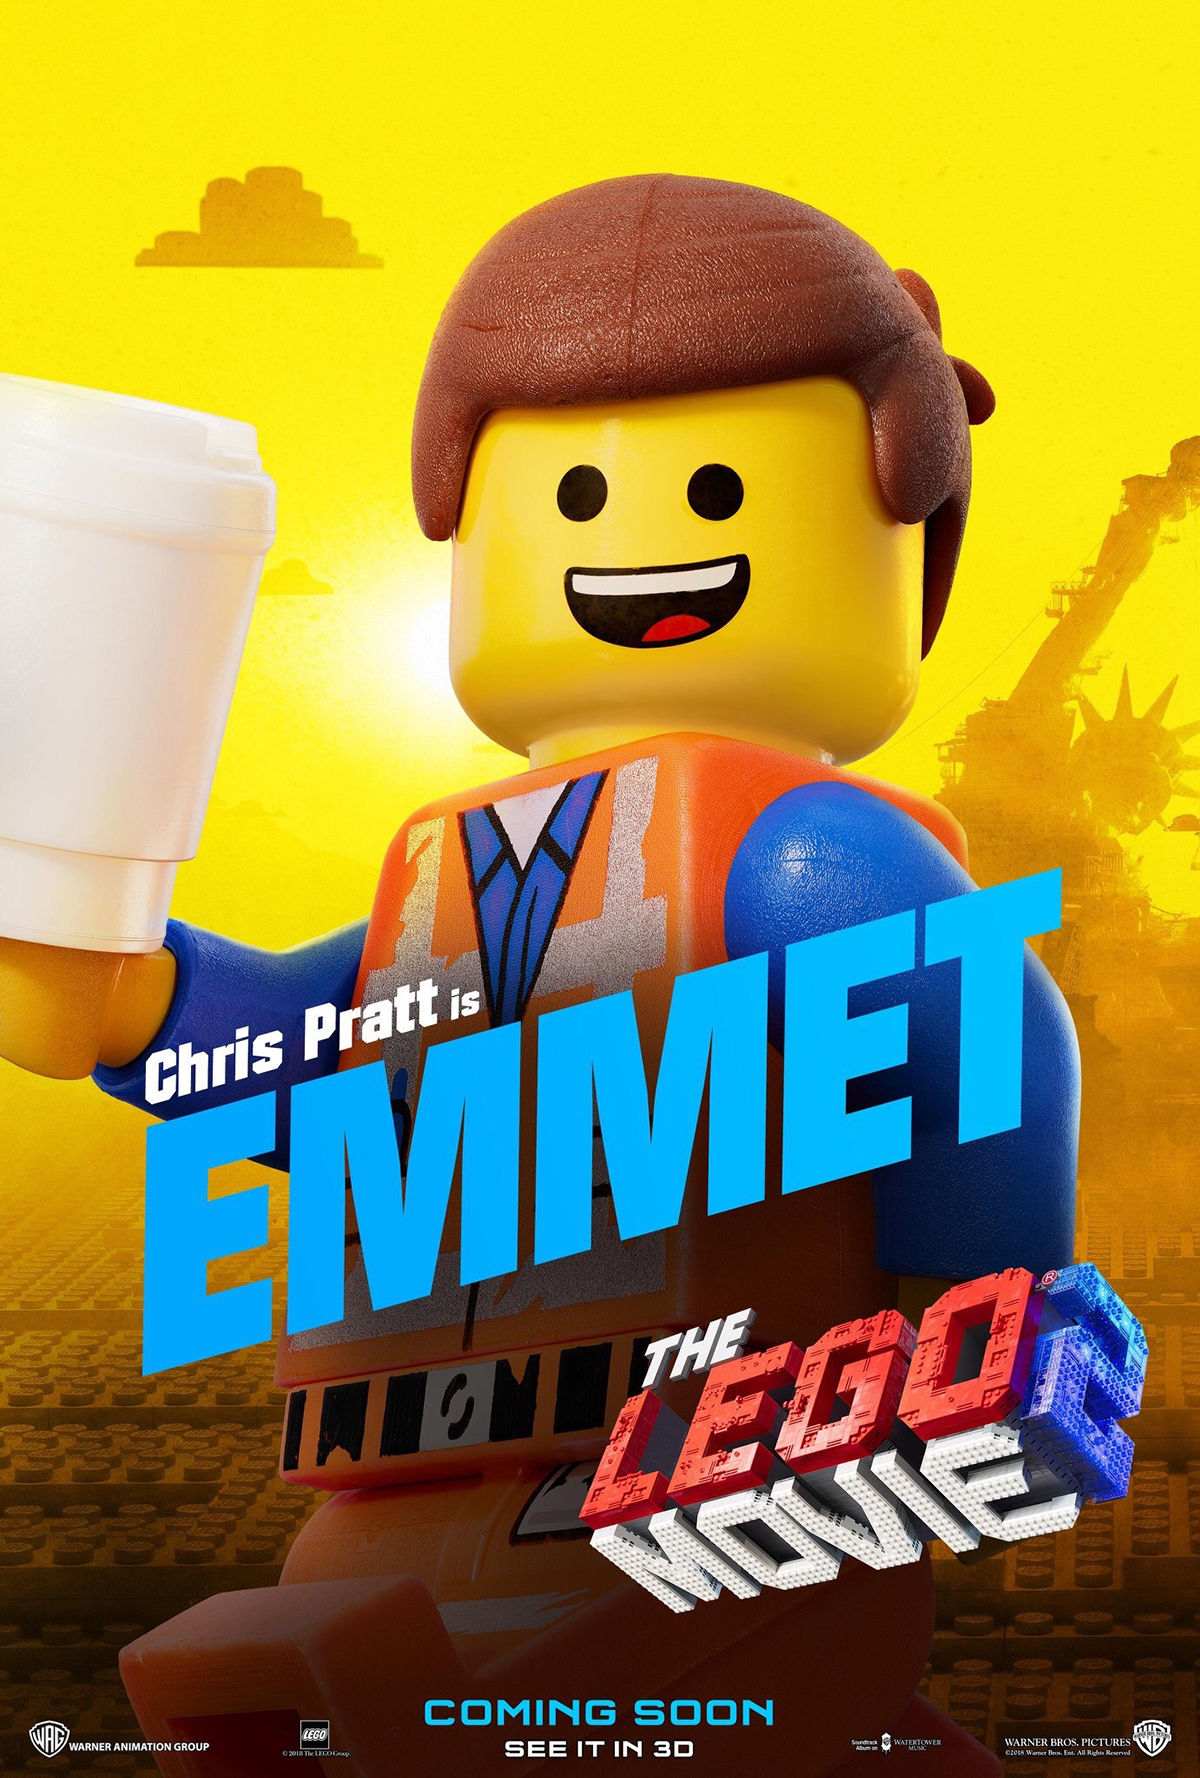 ventilation Mark gispende The Lego Movie 2: The Second Part Posters - JoBlo